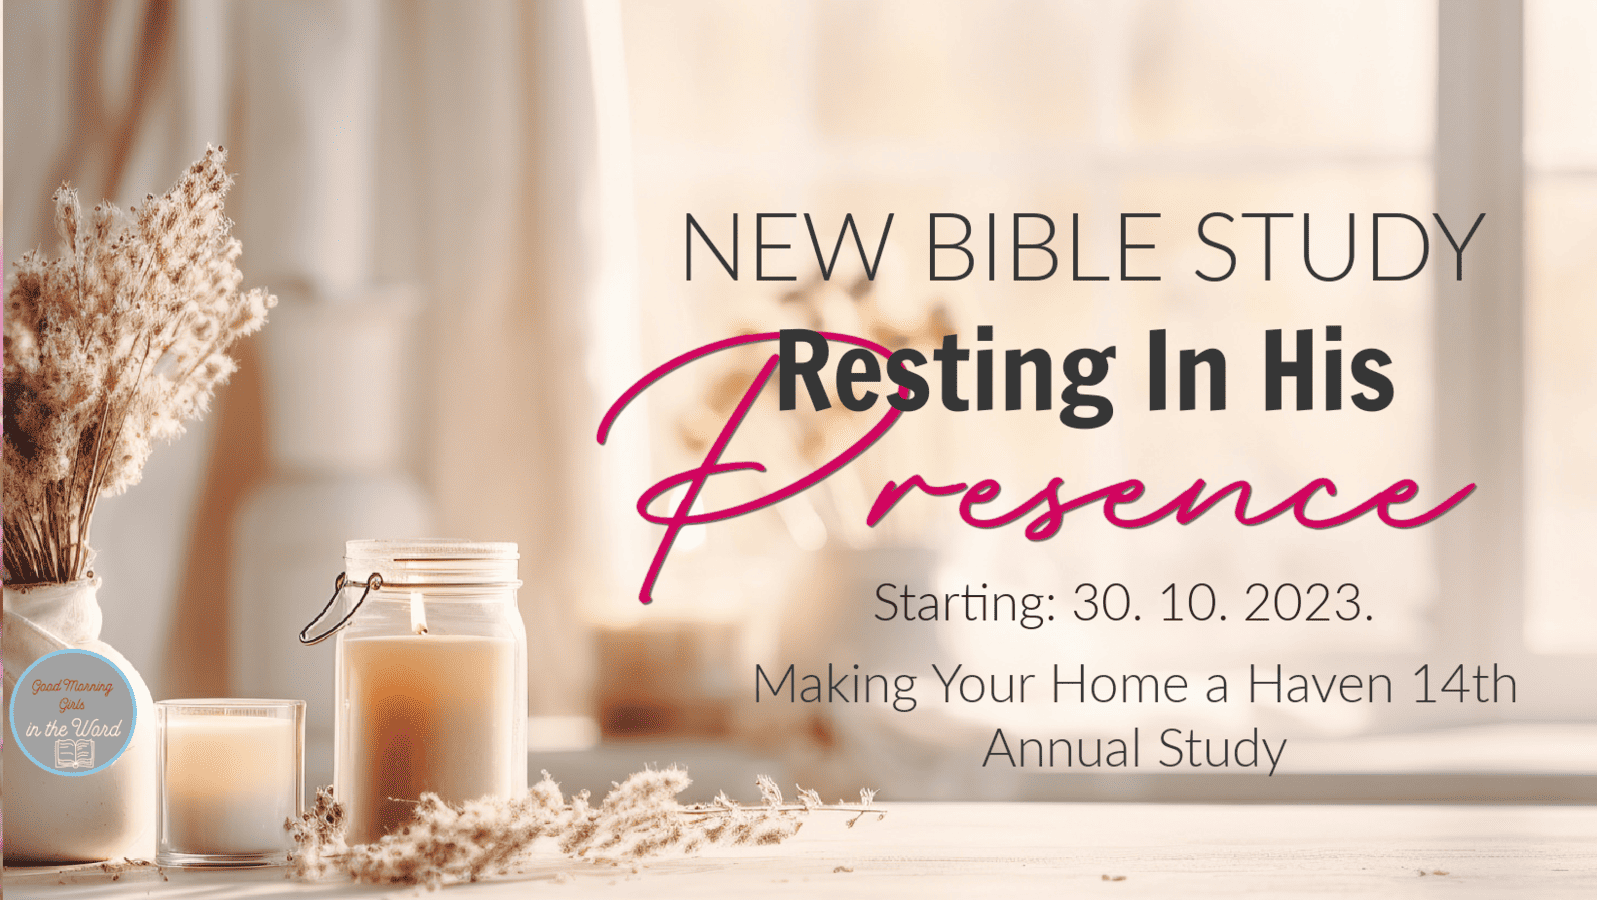 It’s Time to Rest in His Presence